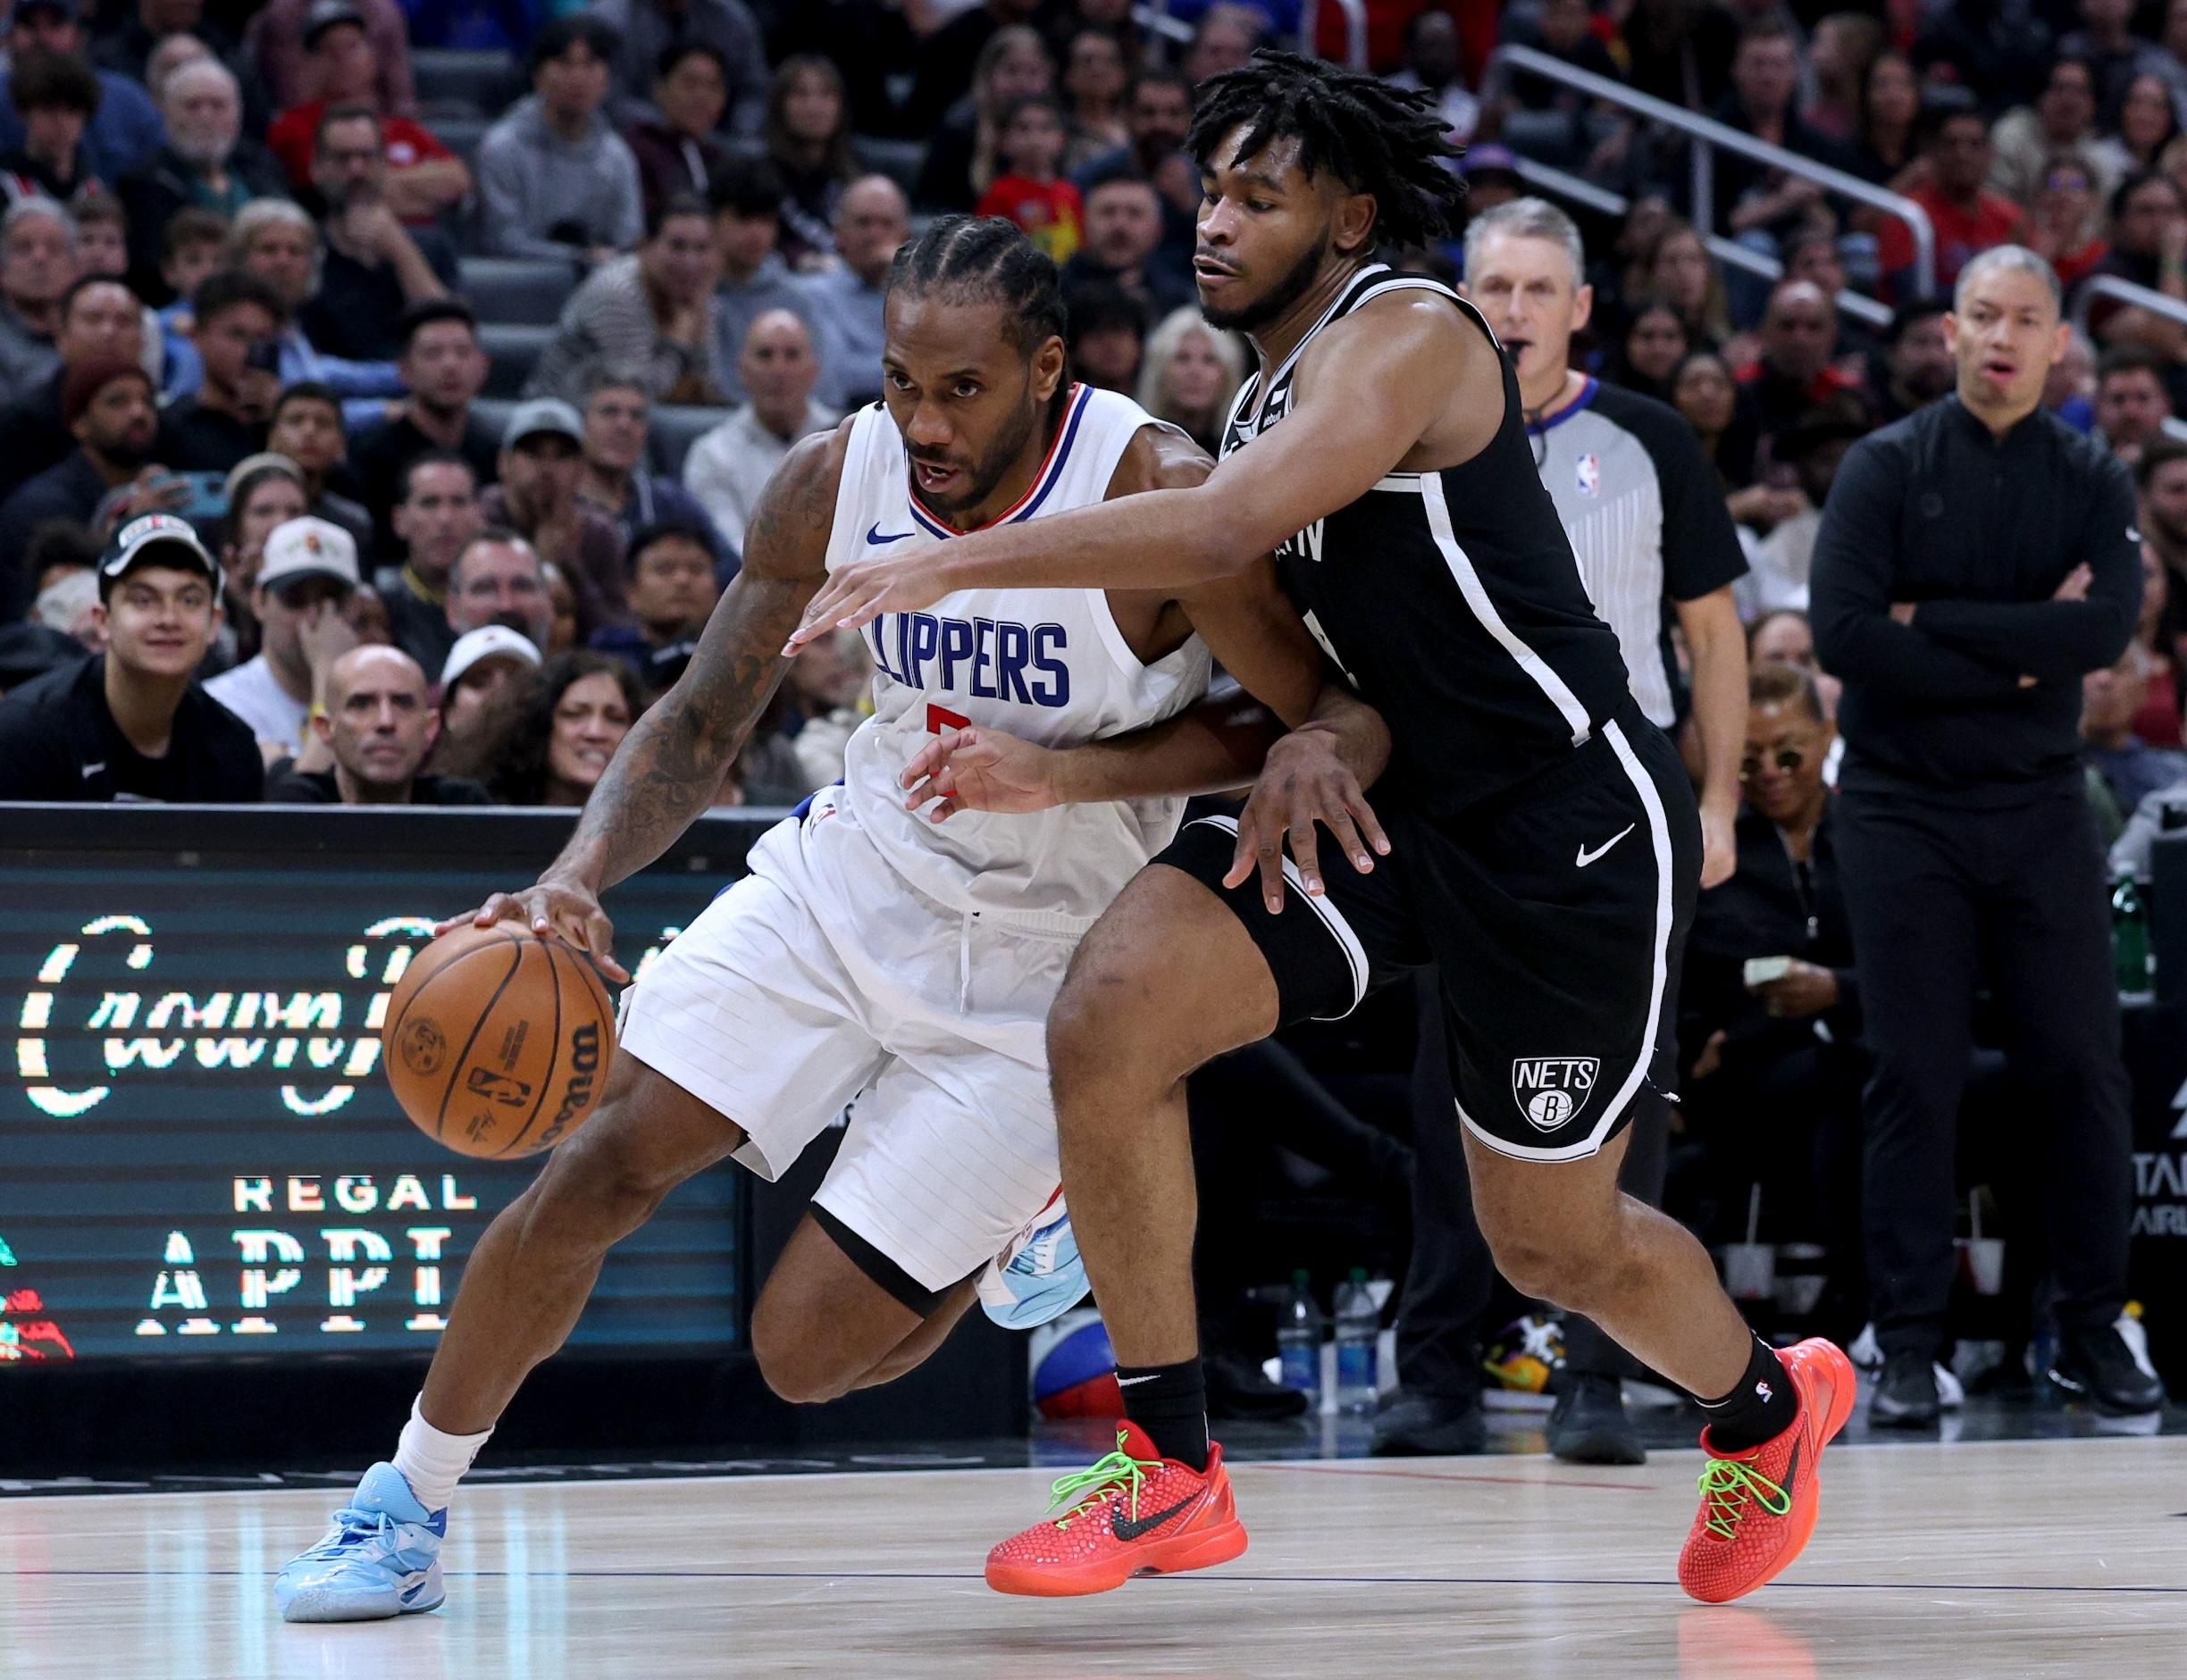 Leonard Scores 14 Points in 5 Minutes, Clippers Overcome 18-point Deficit to Stun Nets 125–114